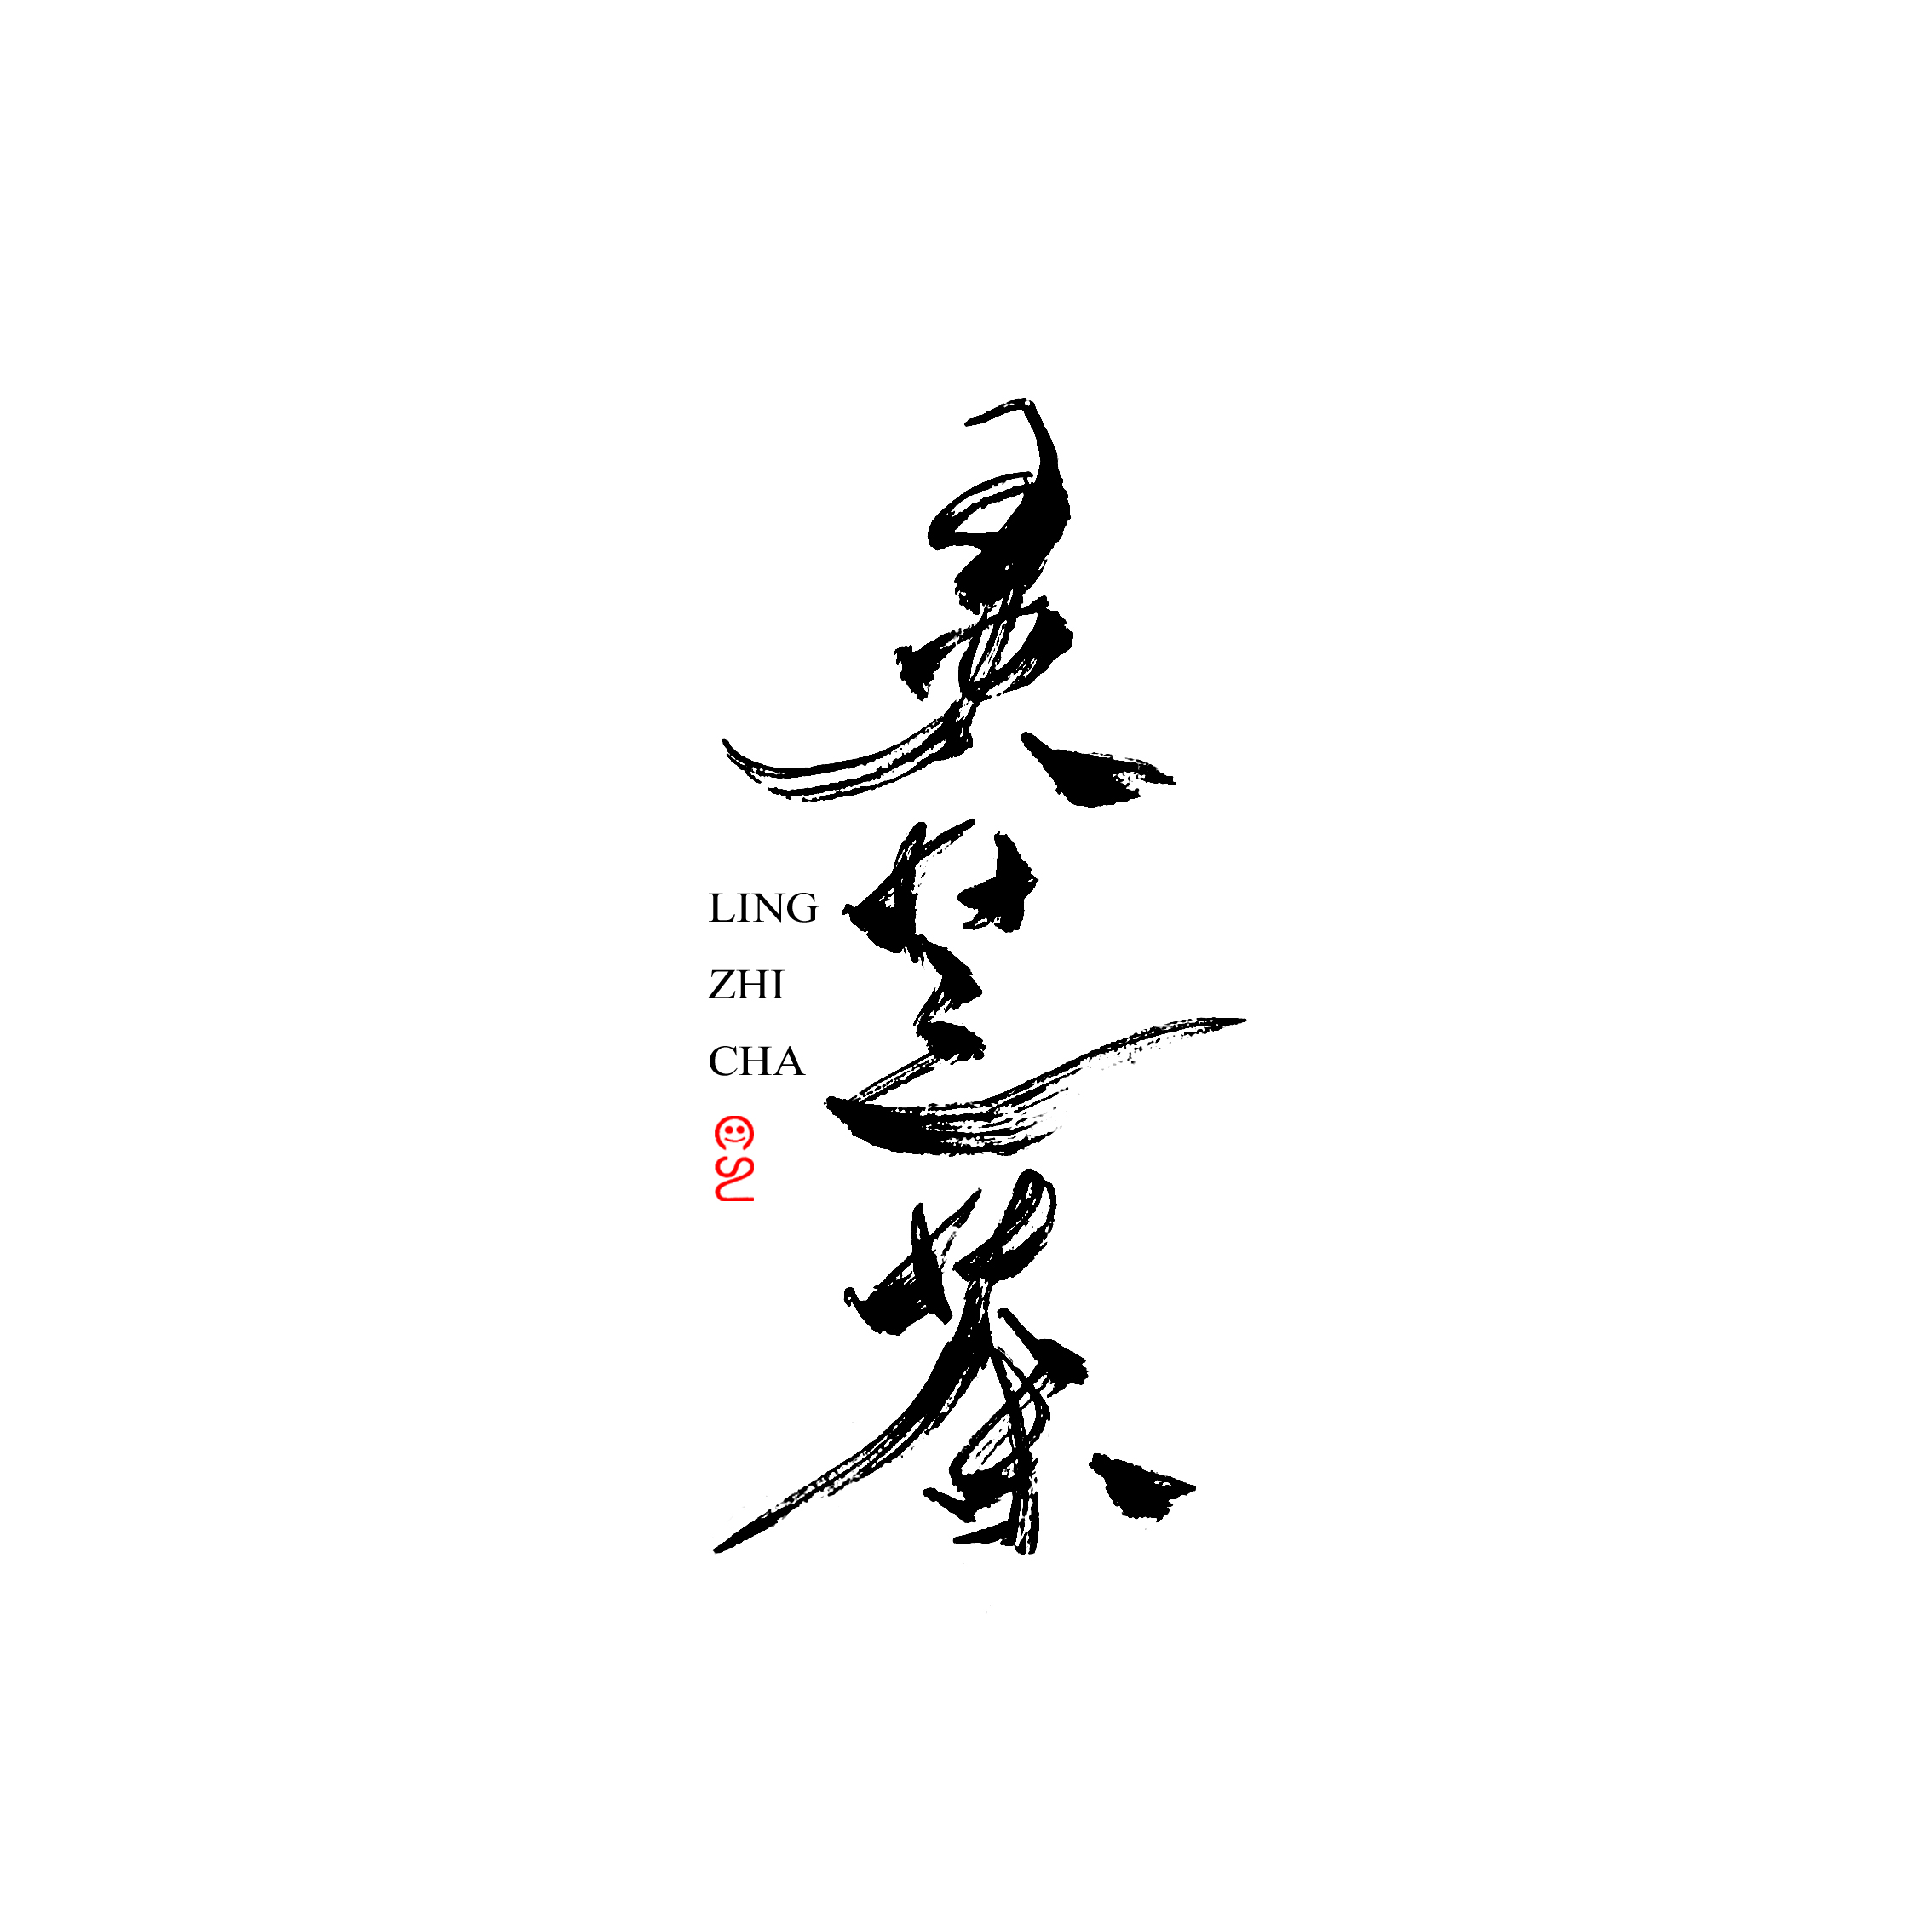 13P Chinese traditional brush font writing practice